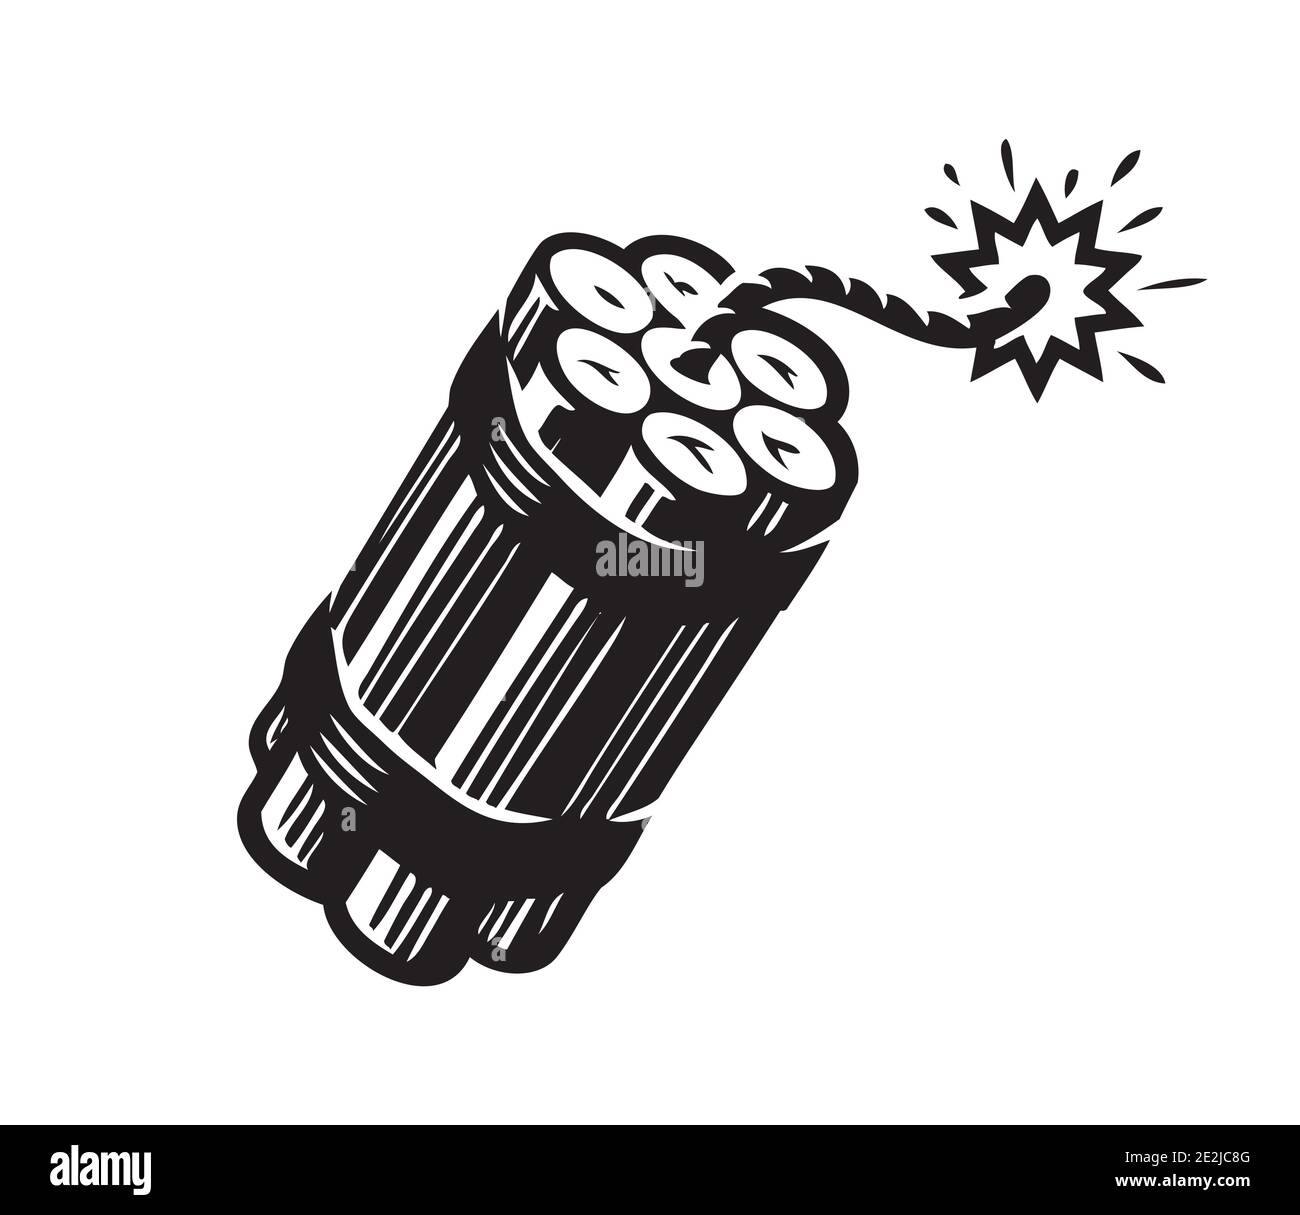 Dynamite with burning wick. Bomb, explosive symbol vector Stock Vector